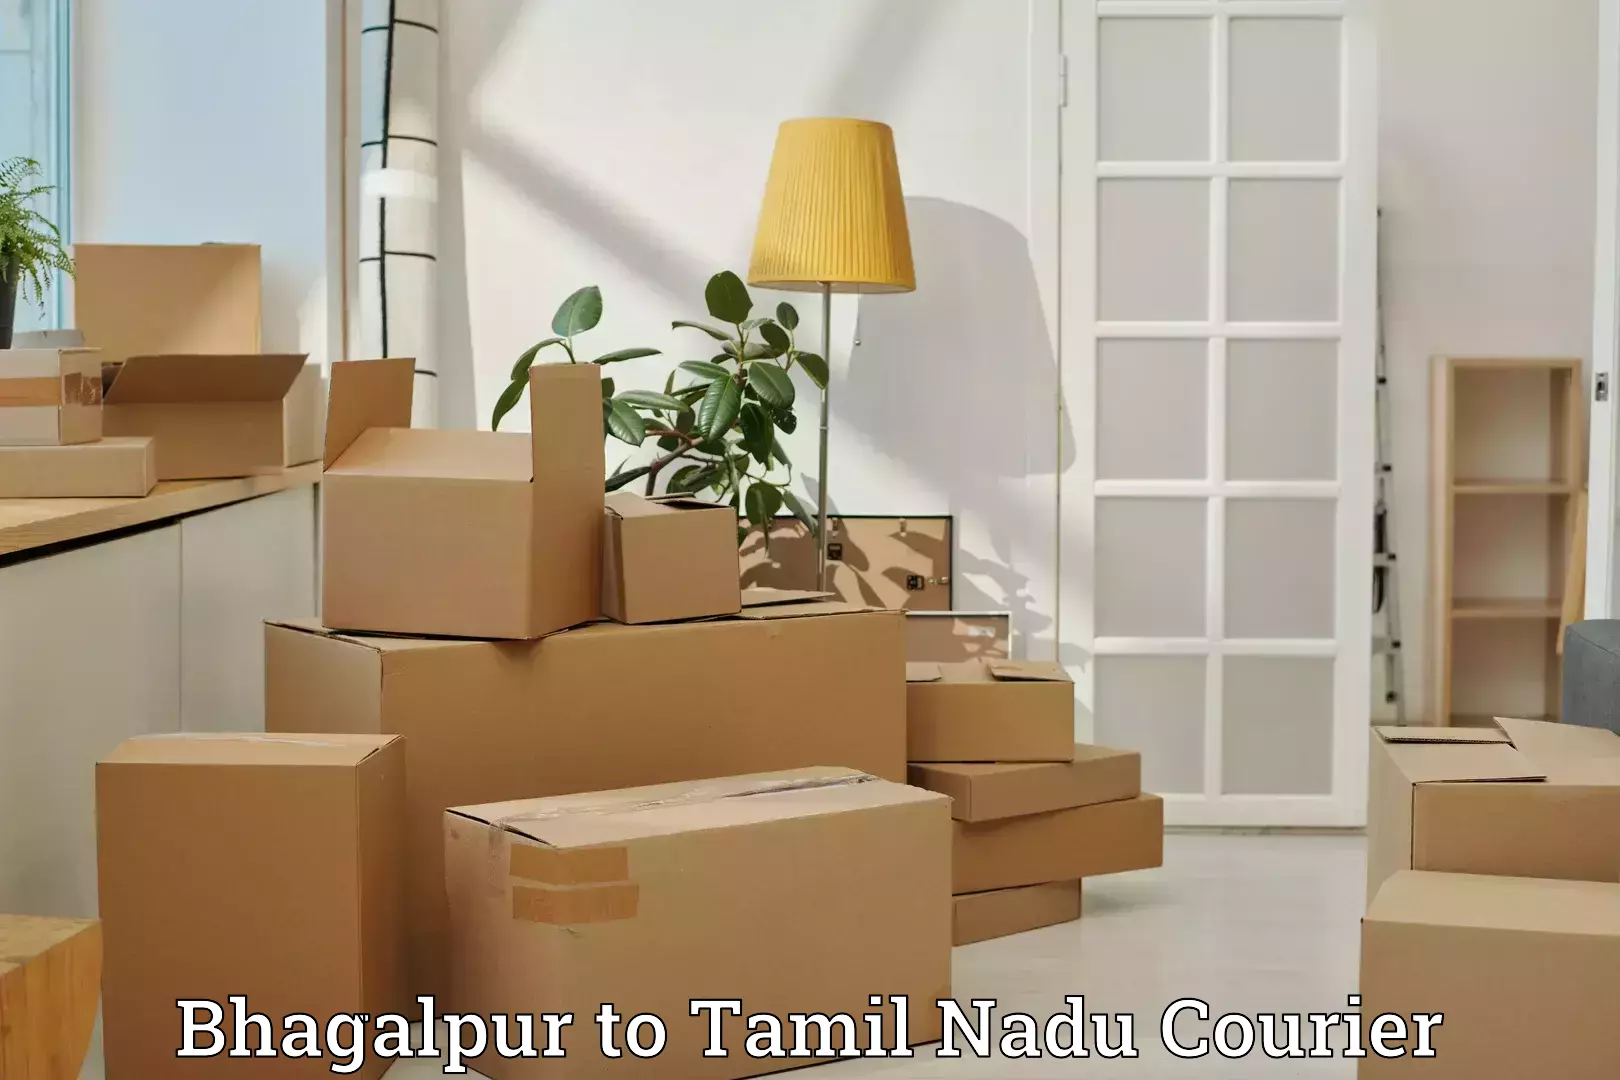 Personal effects shipping in Bhagalpur to Tamil Nadu